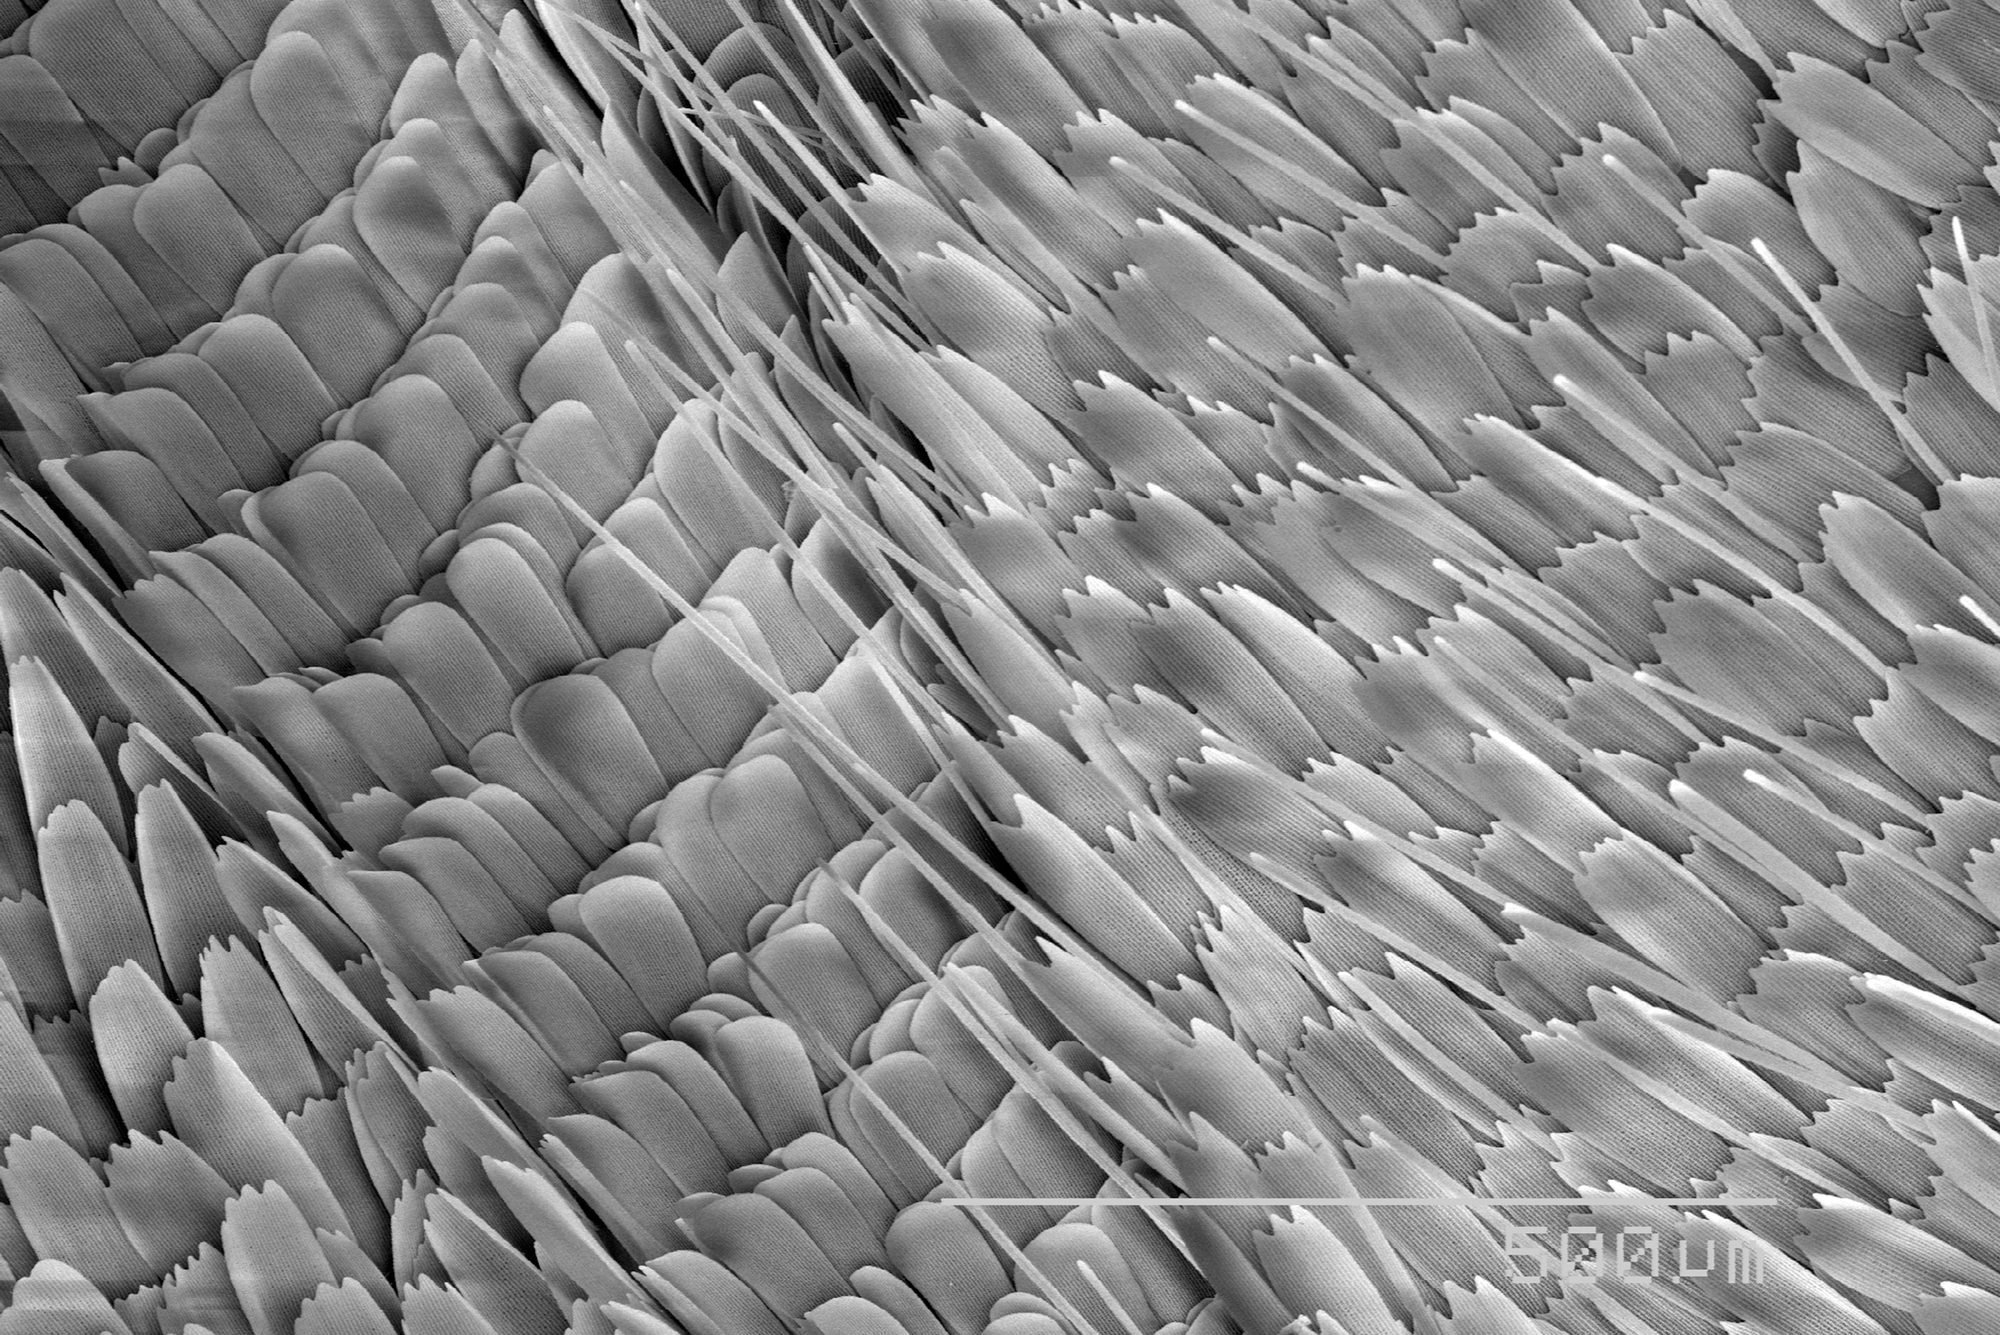 SEM Micrograph of a butterfly scales